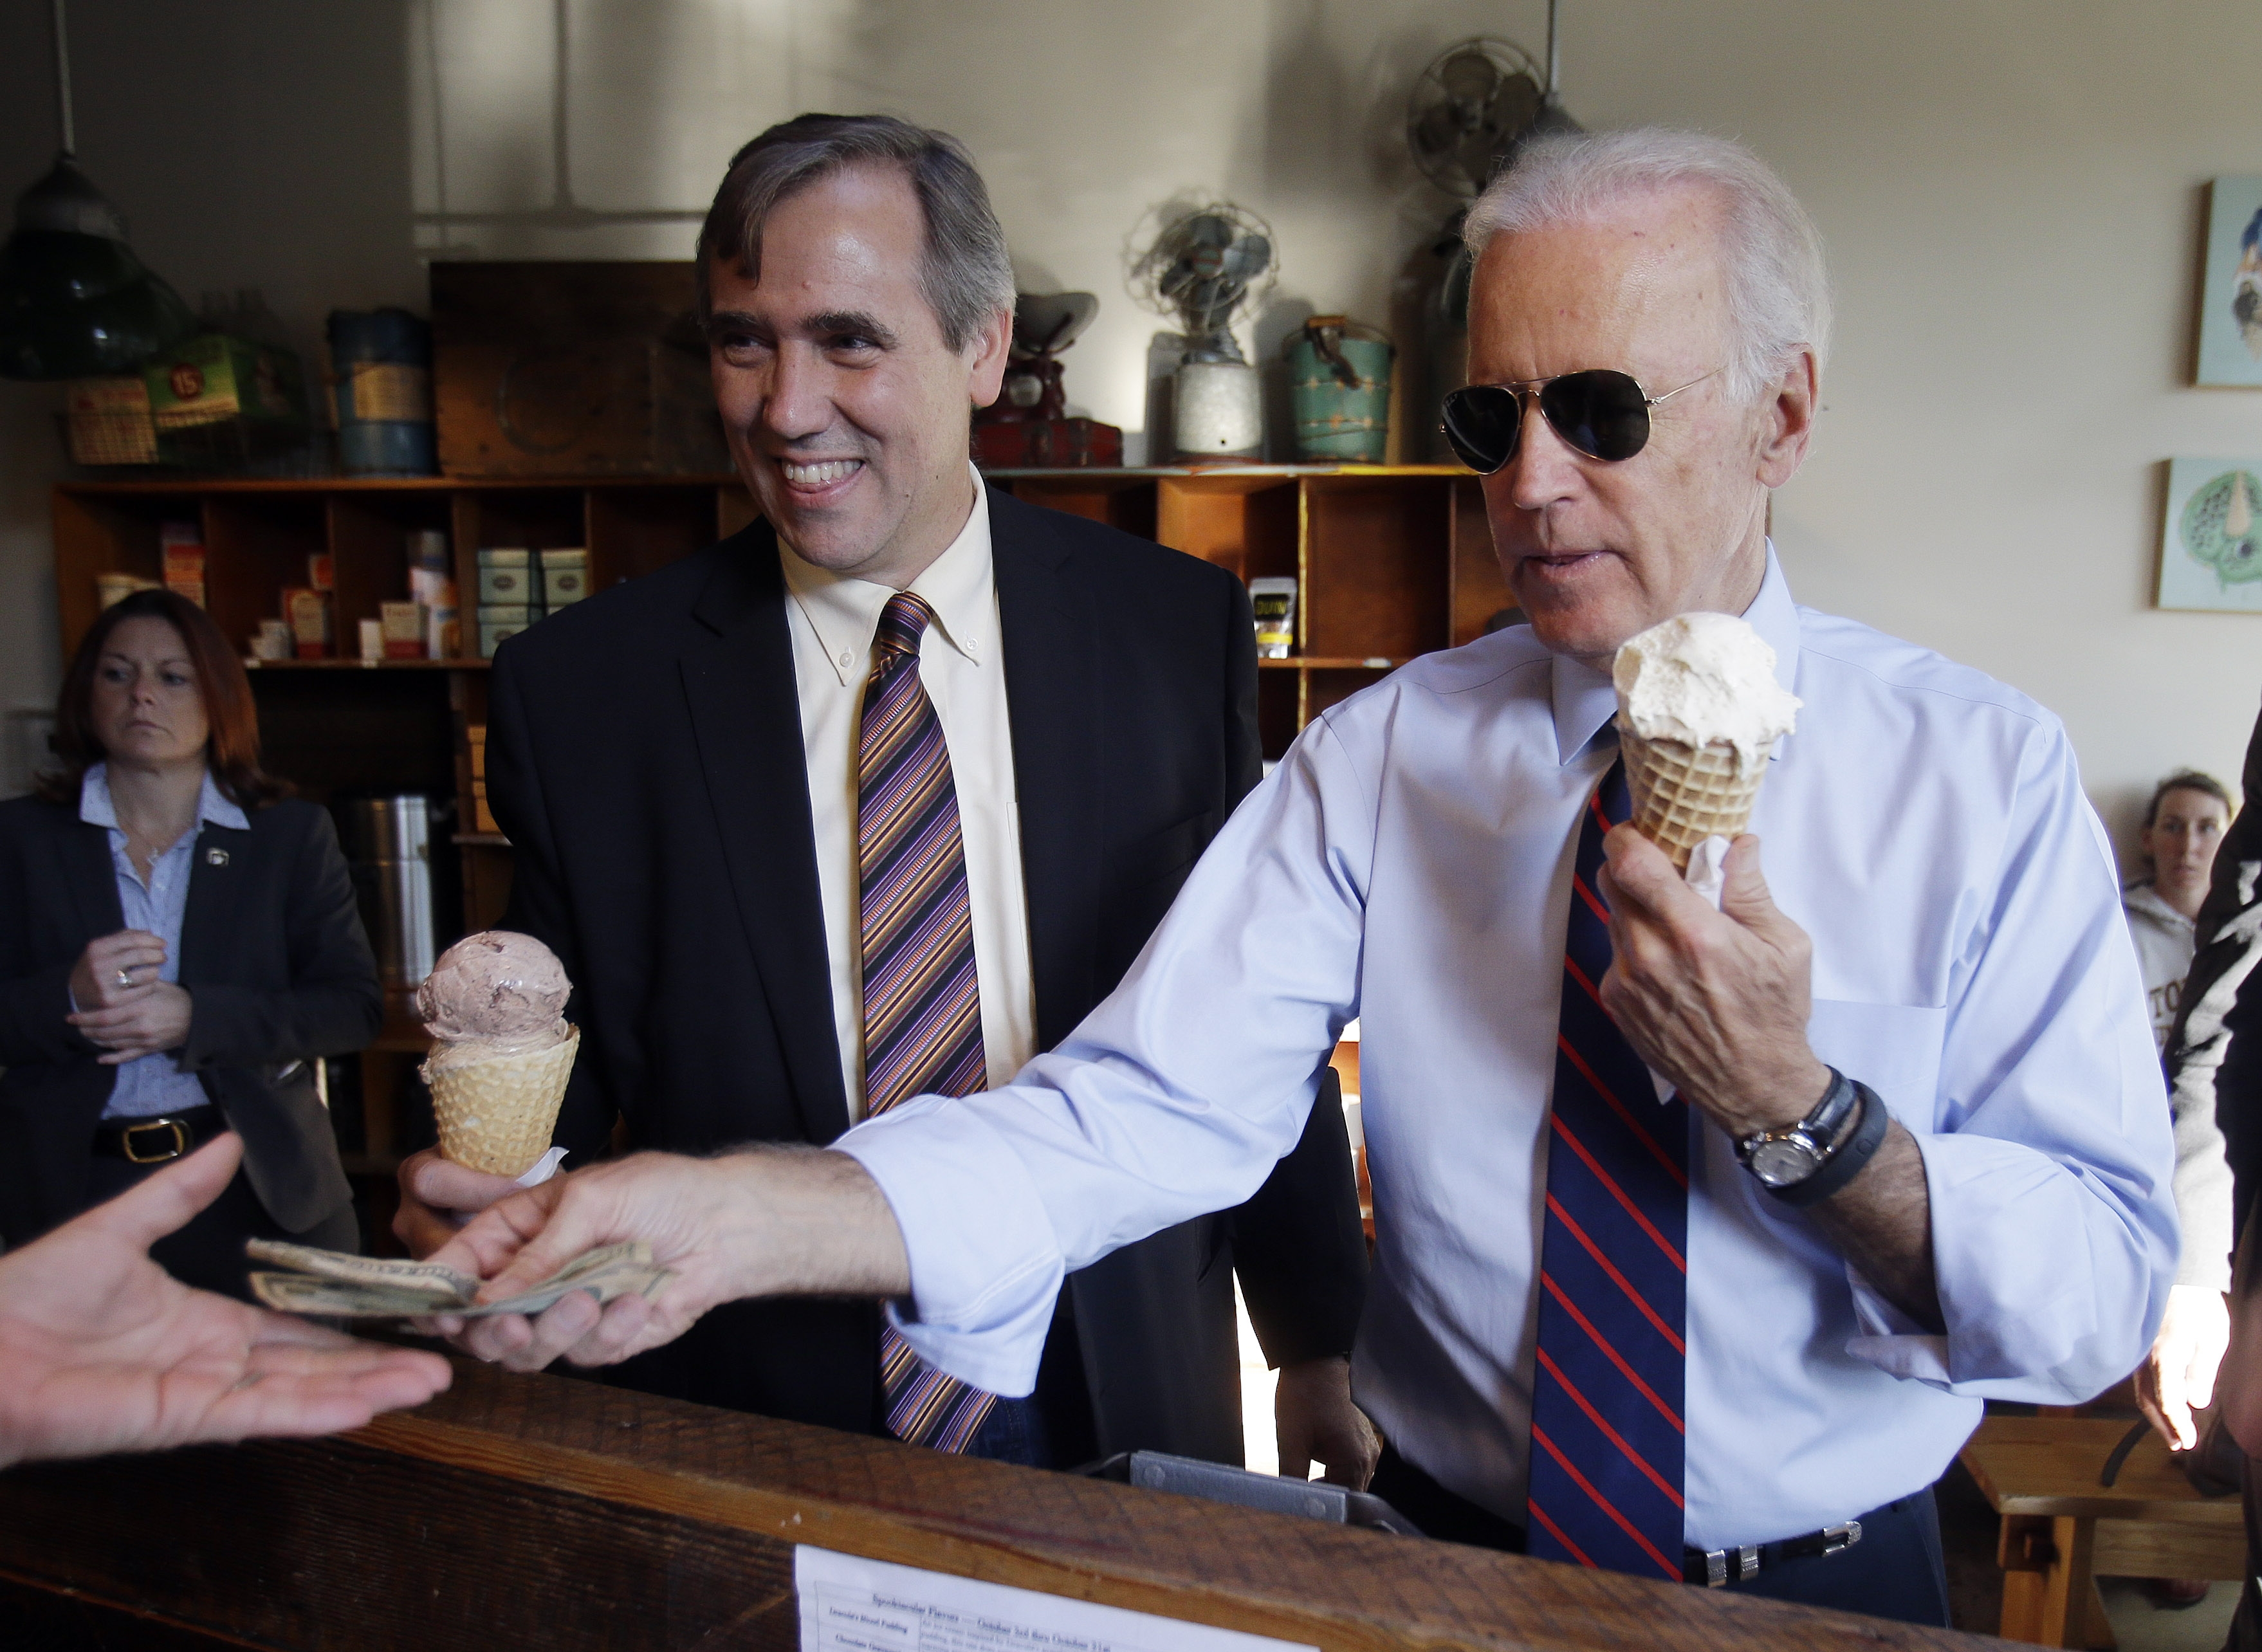 Vice President Joe Biden, right, pays for ice cream cones for himself and U.S. Sen. Jeff Merkley after a campaign rally in Portland, Ore., Wednesday, Oct. 8, 2014. (Don Ryan—AP)